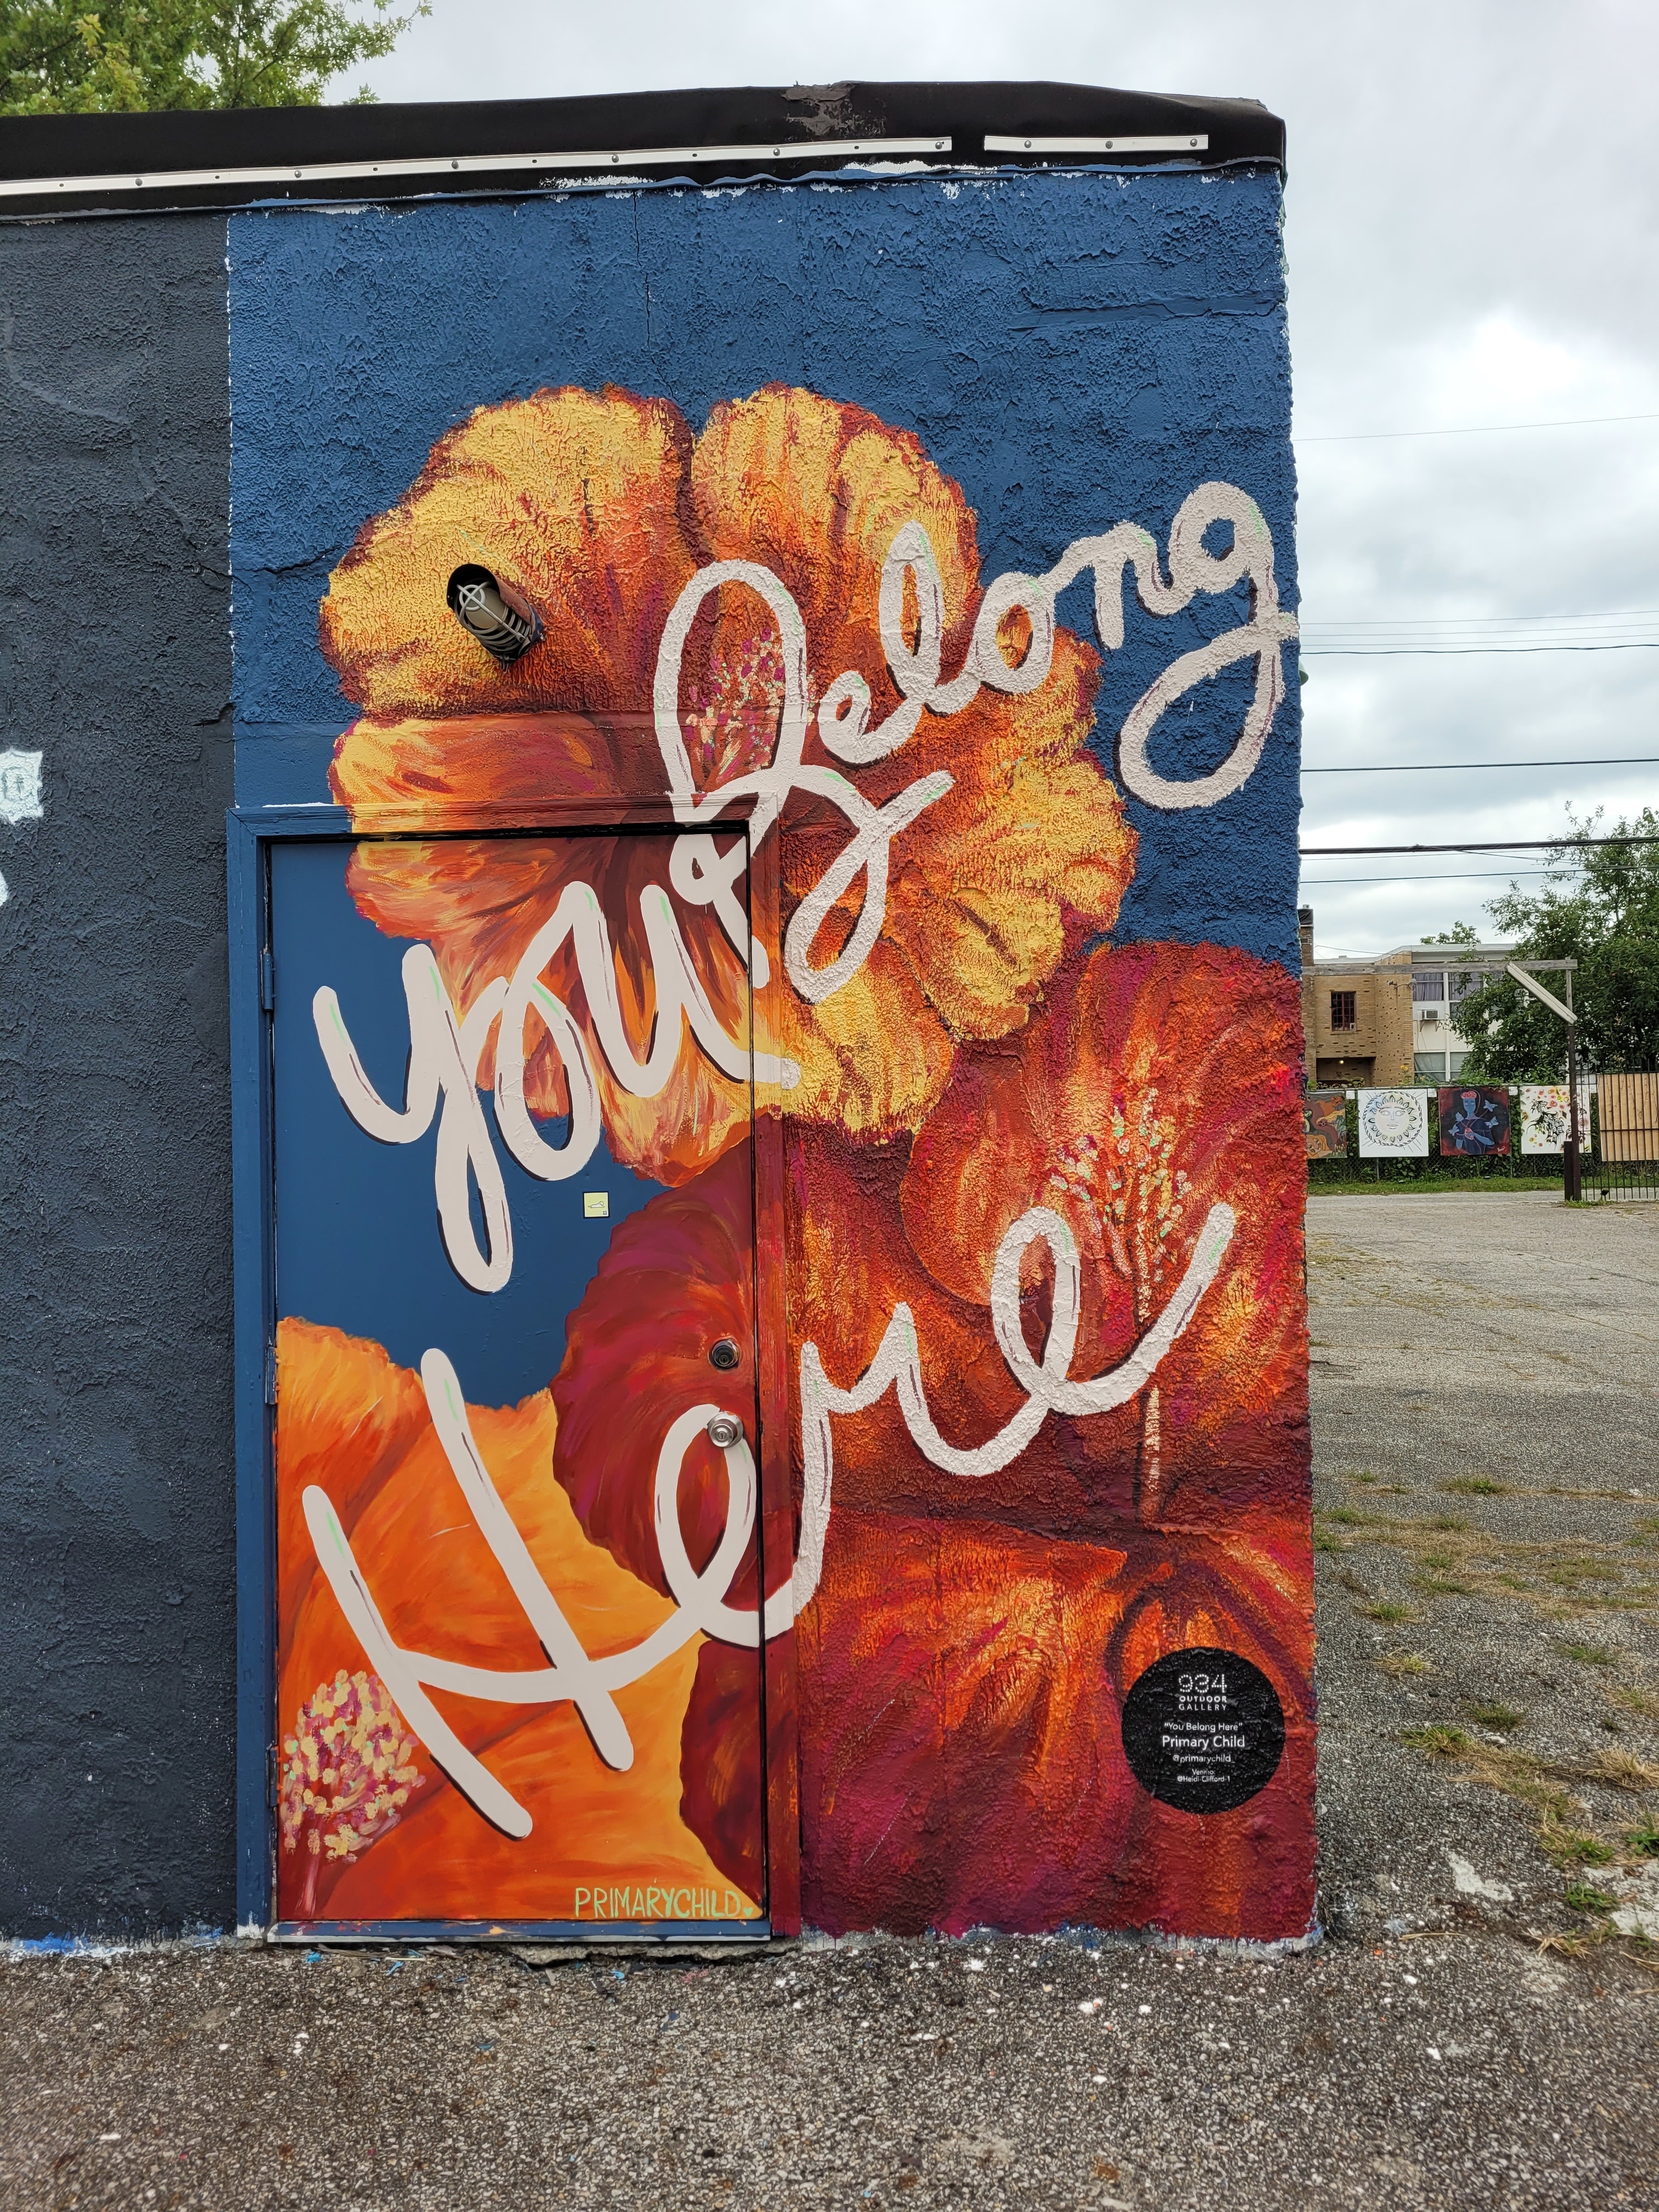 You Belong Here by Primary Child (934 Outdoor Gallery)